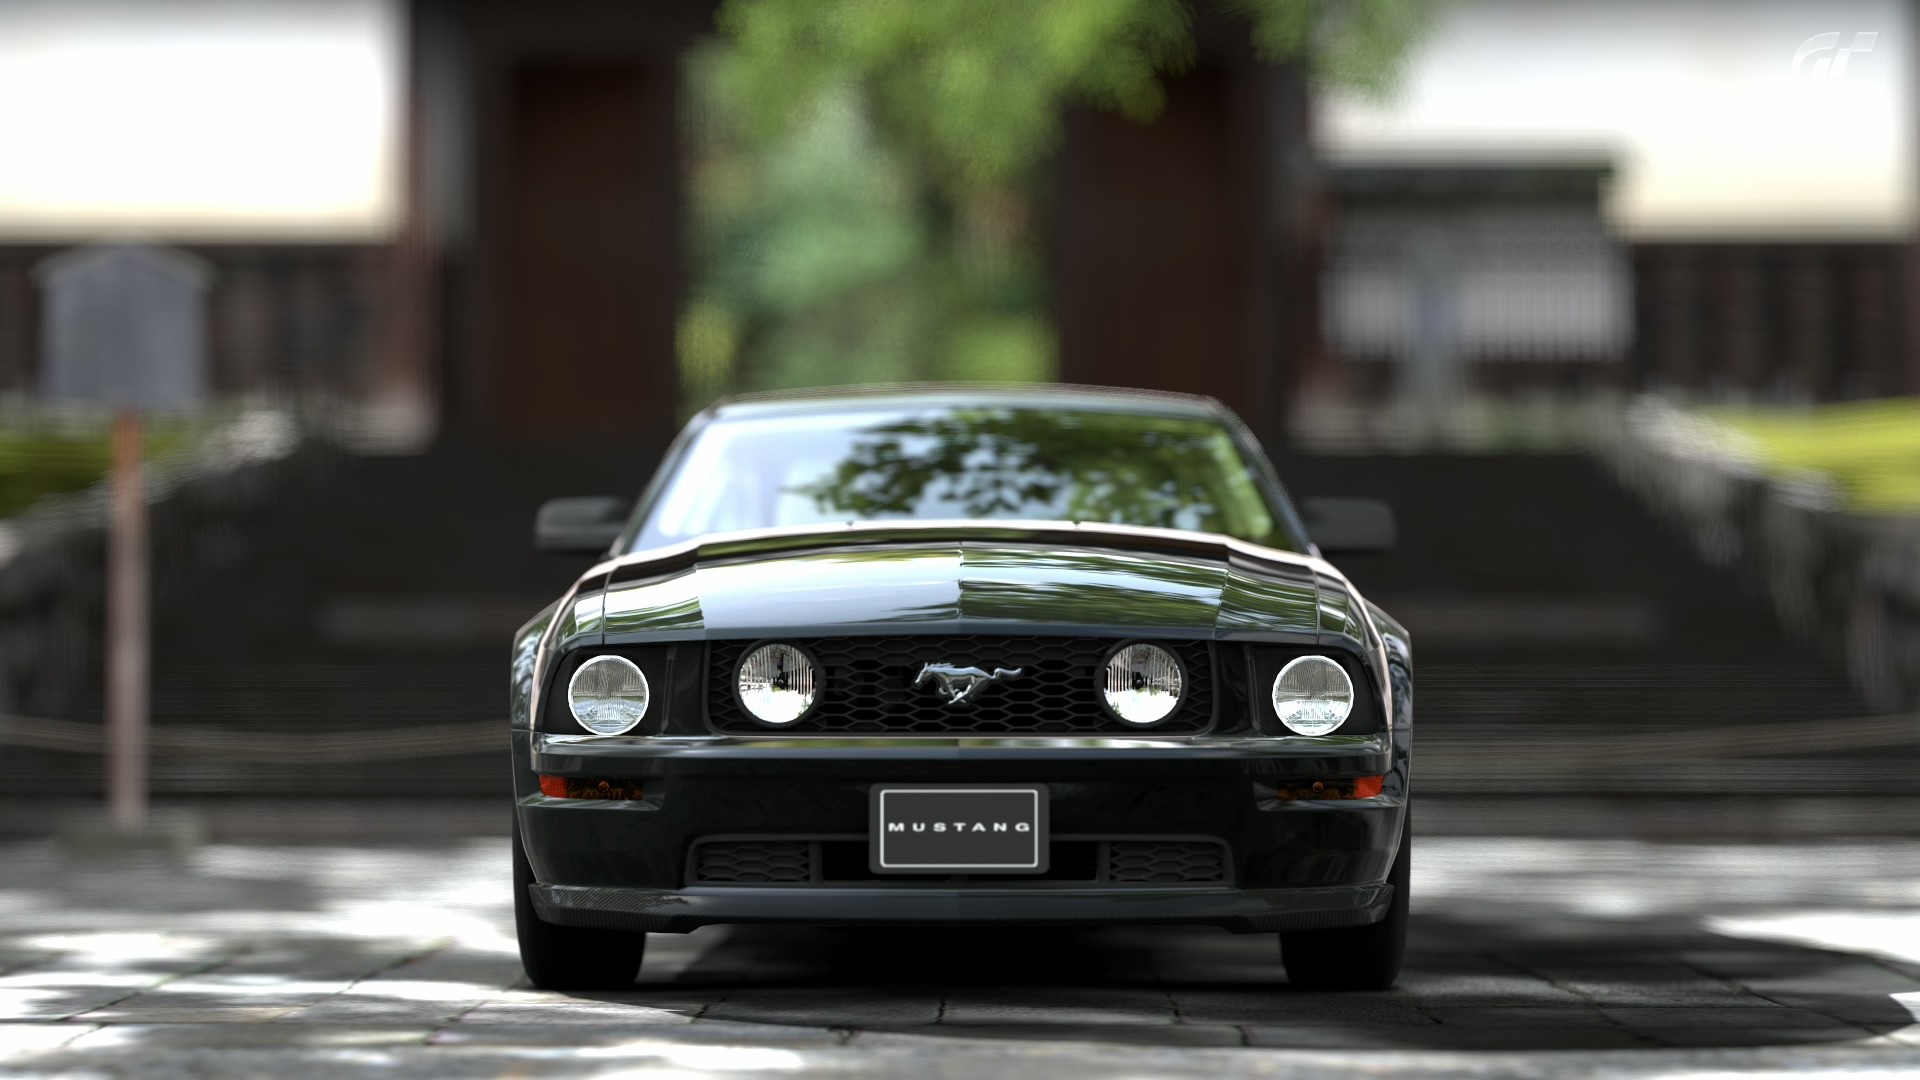 video, Games, Cars, Ford, Mustang, Gran, Turismo, 5, Races, Playstation Wallpaper